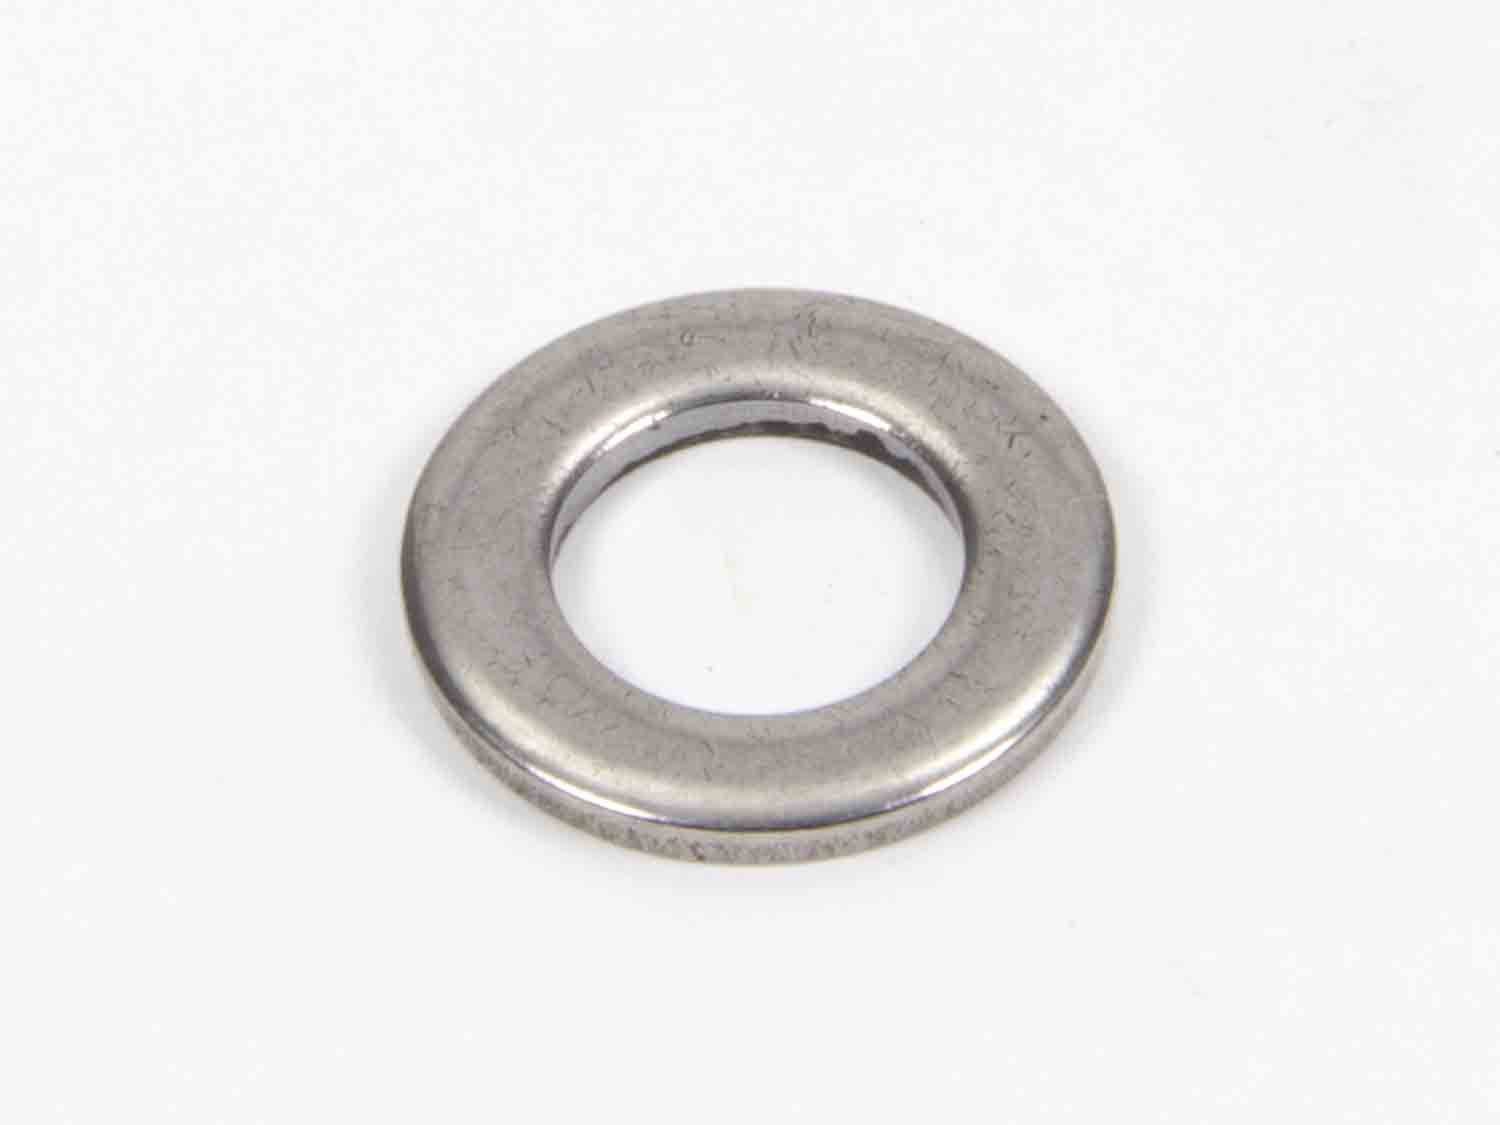 ARP, Stainless Steel Flat Washer - 3/8 ID x 11/16 OD (1)